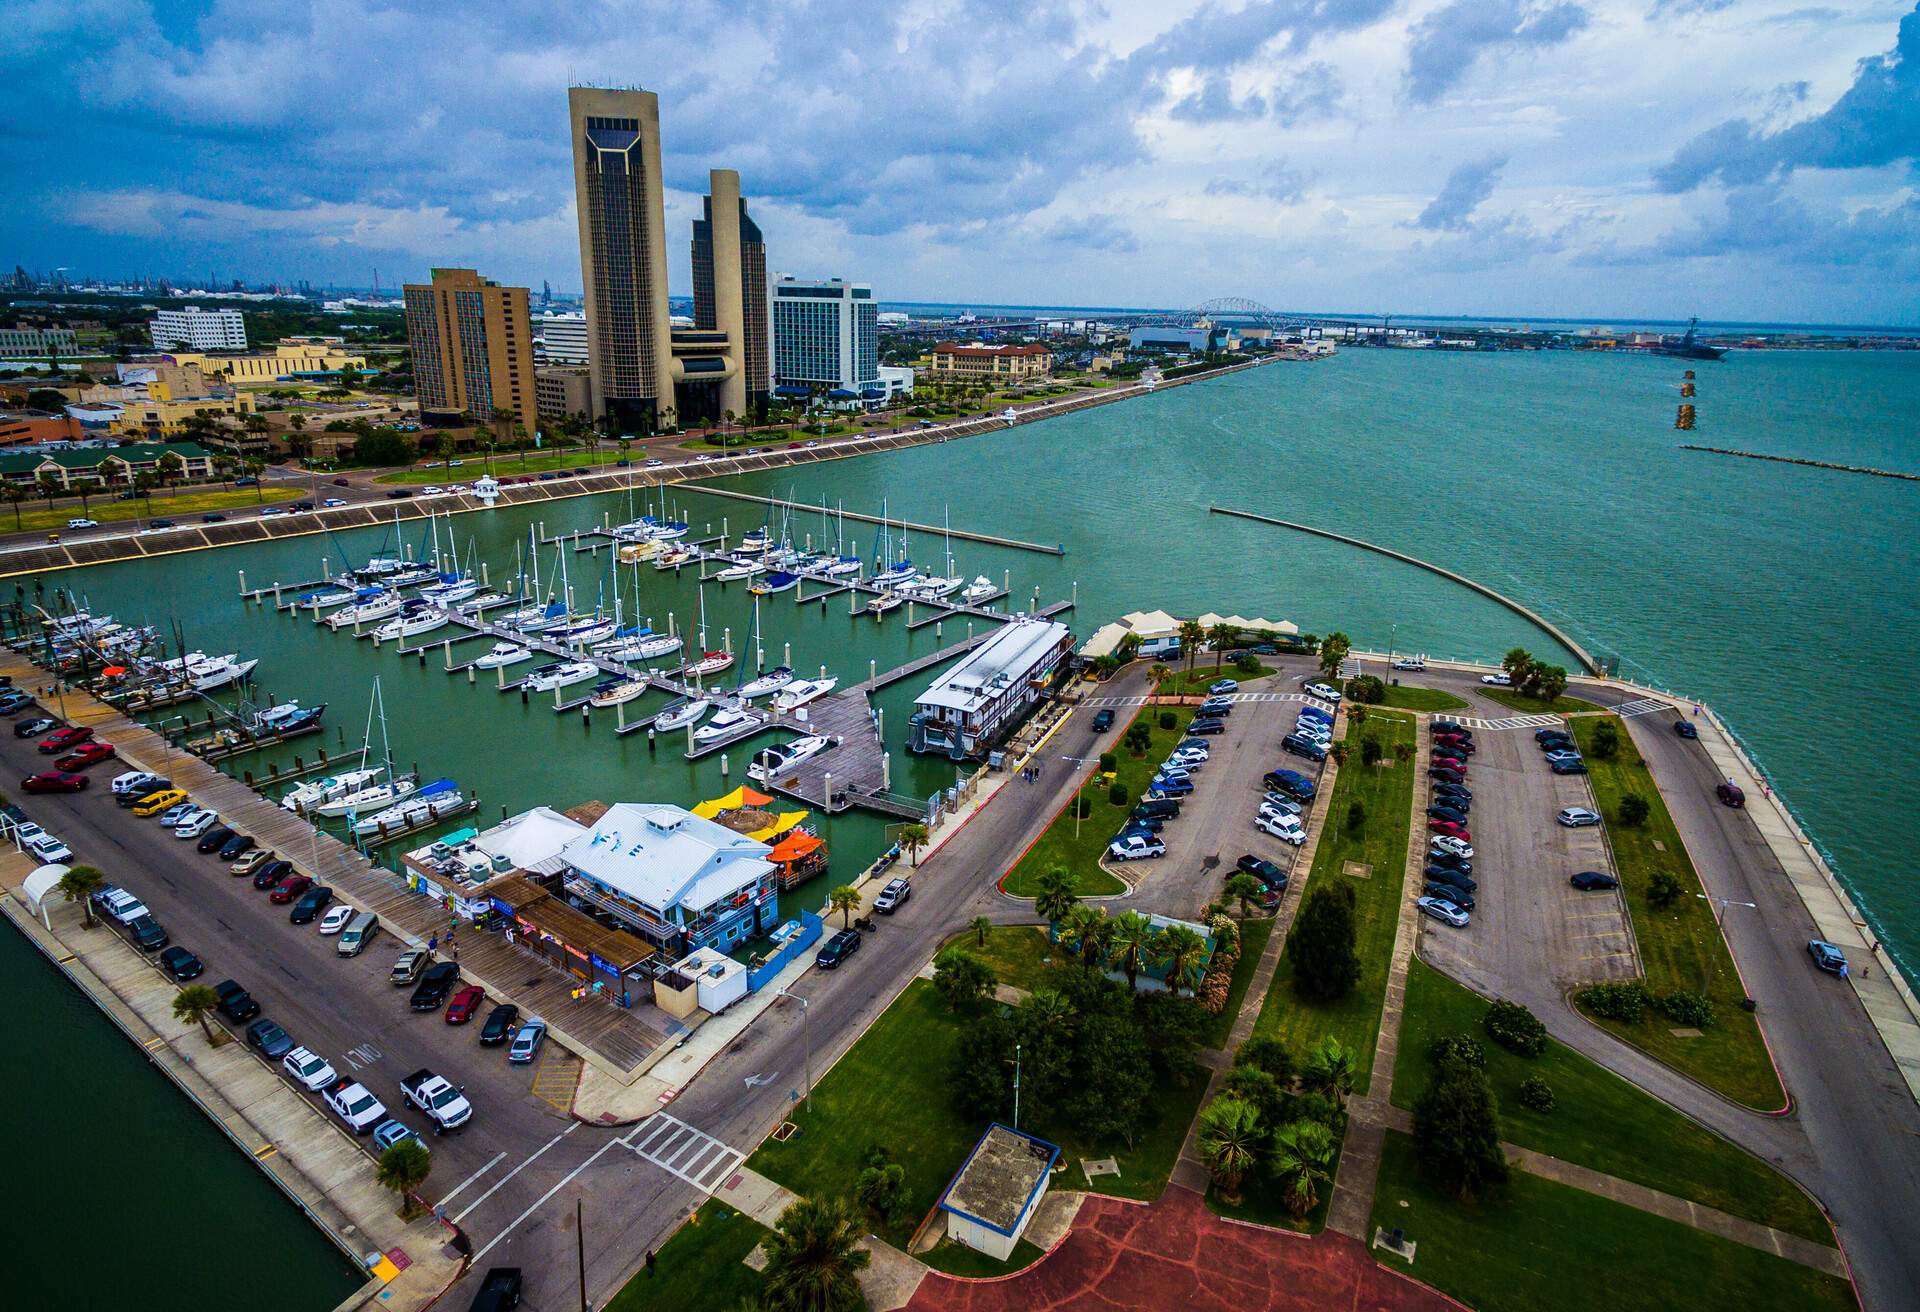 Paradise Gulf of Mexico Corpus Christi Texas Marina Aerial. The T-head with the marina , boats , sailboats , yachts , Tall Twin Towers at downtown Corpus Christi. Calm waters on the pier and inside the marina or harbor. The USS lexington is in the distance also called the 